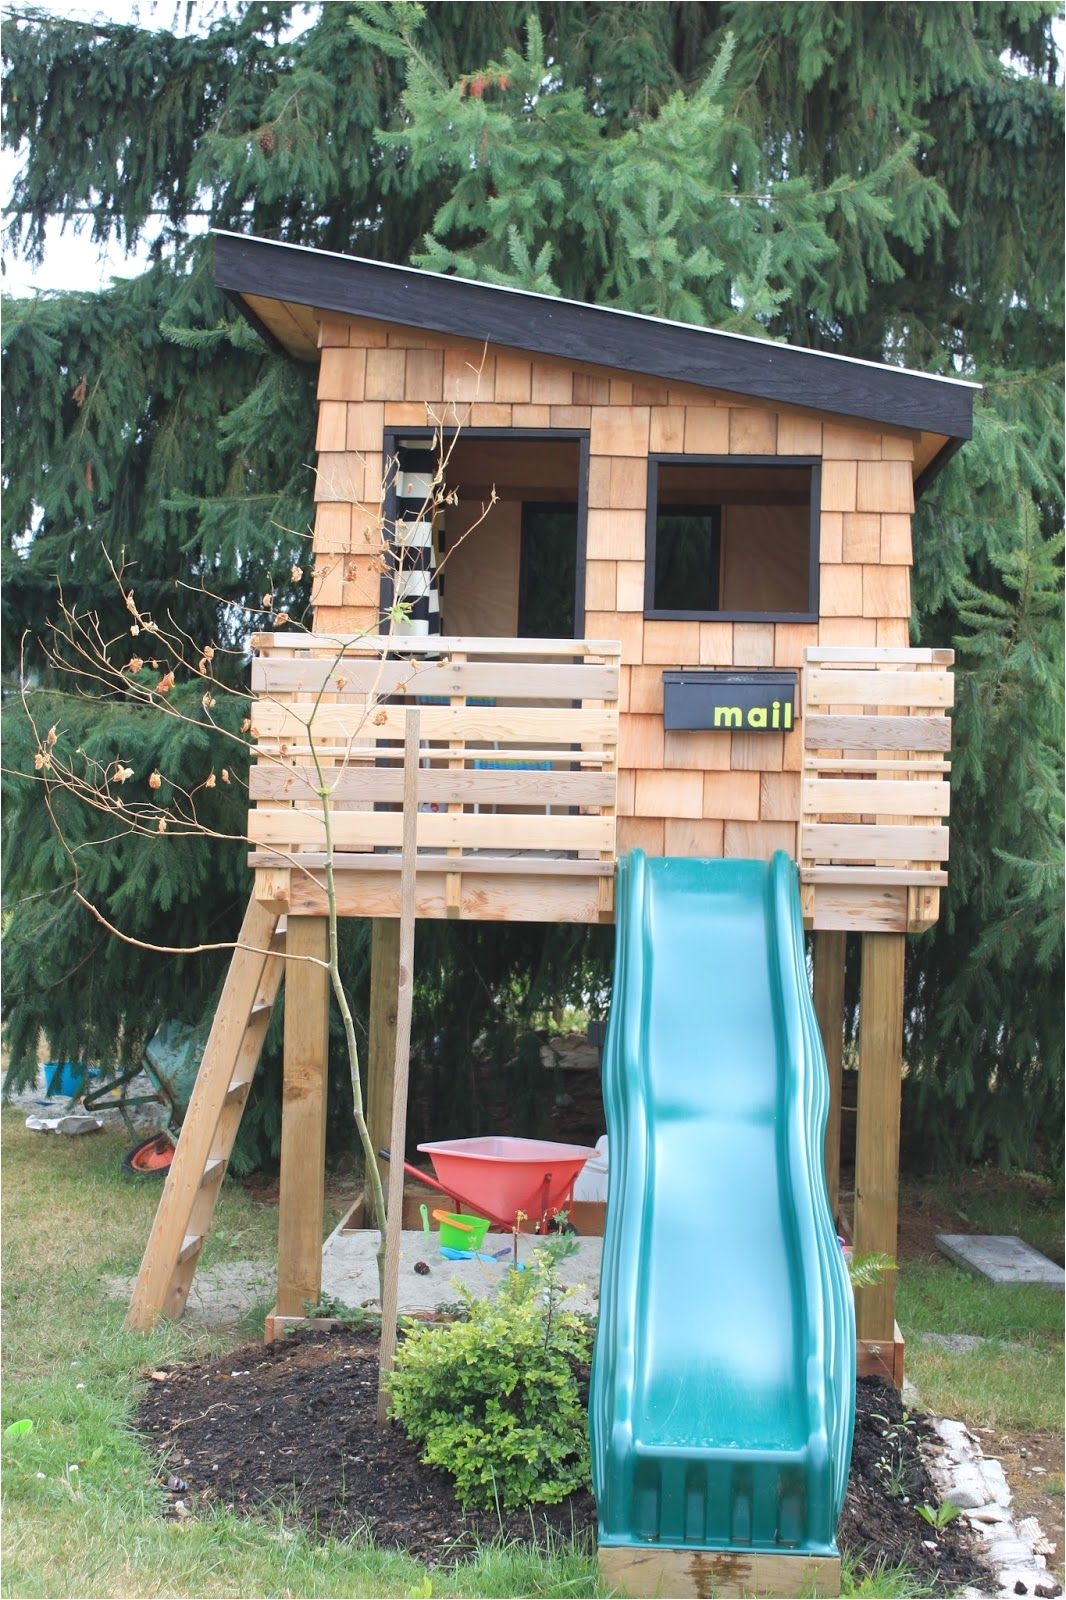 15 pimped out playhouses your kids need in the backyard